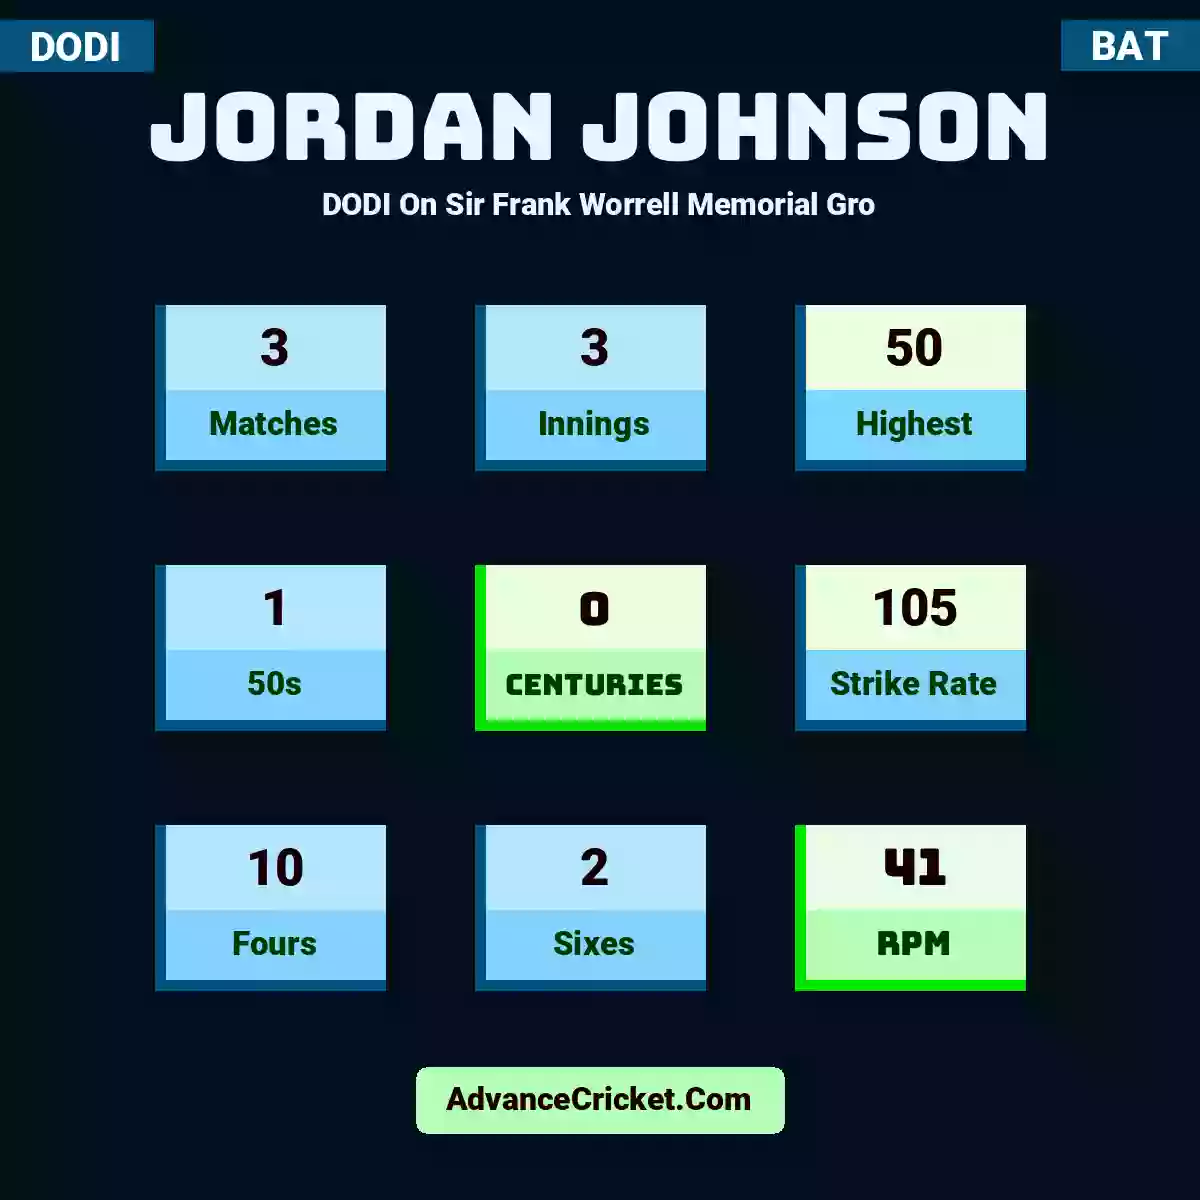 Jordan Johnson DODI  On Sir Frank Worrell Memorial Gro, Jordan Johnson played 3 matches, scored 50 runs as highest, 1 half-centuries, and 0 centuries, with a strike rate of 105. J.Johnson hit 10 fours and 2 sixes, with an RPM of 41.